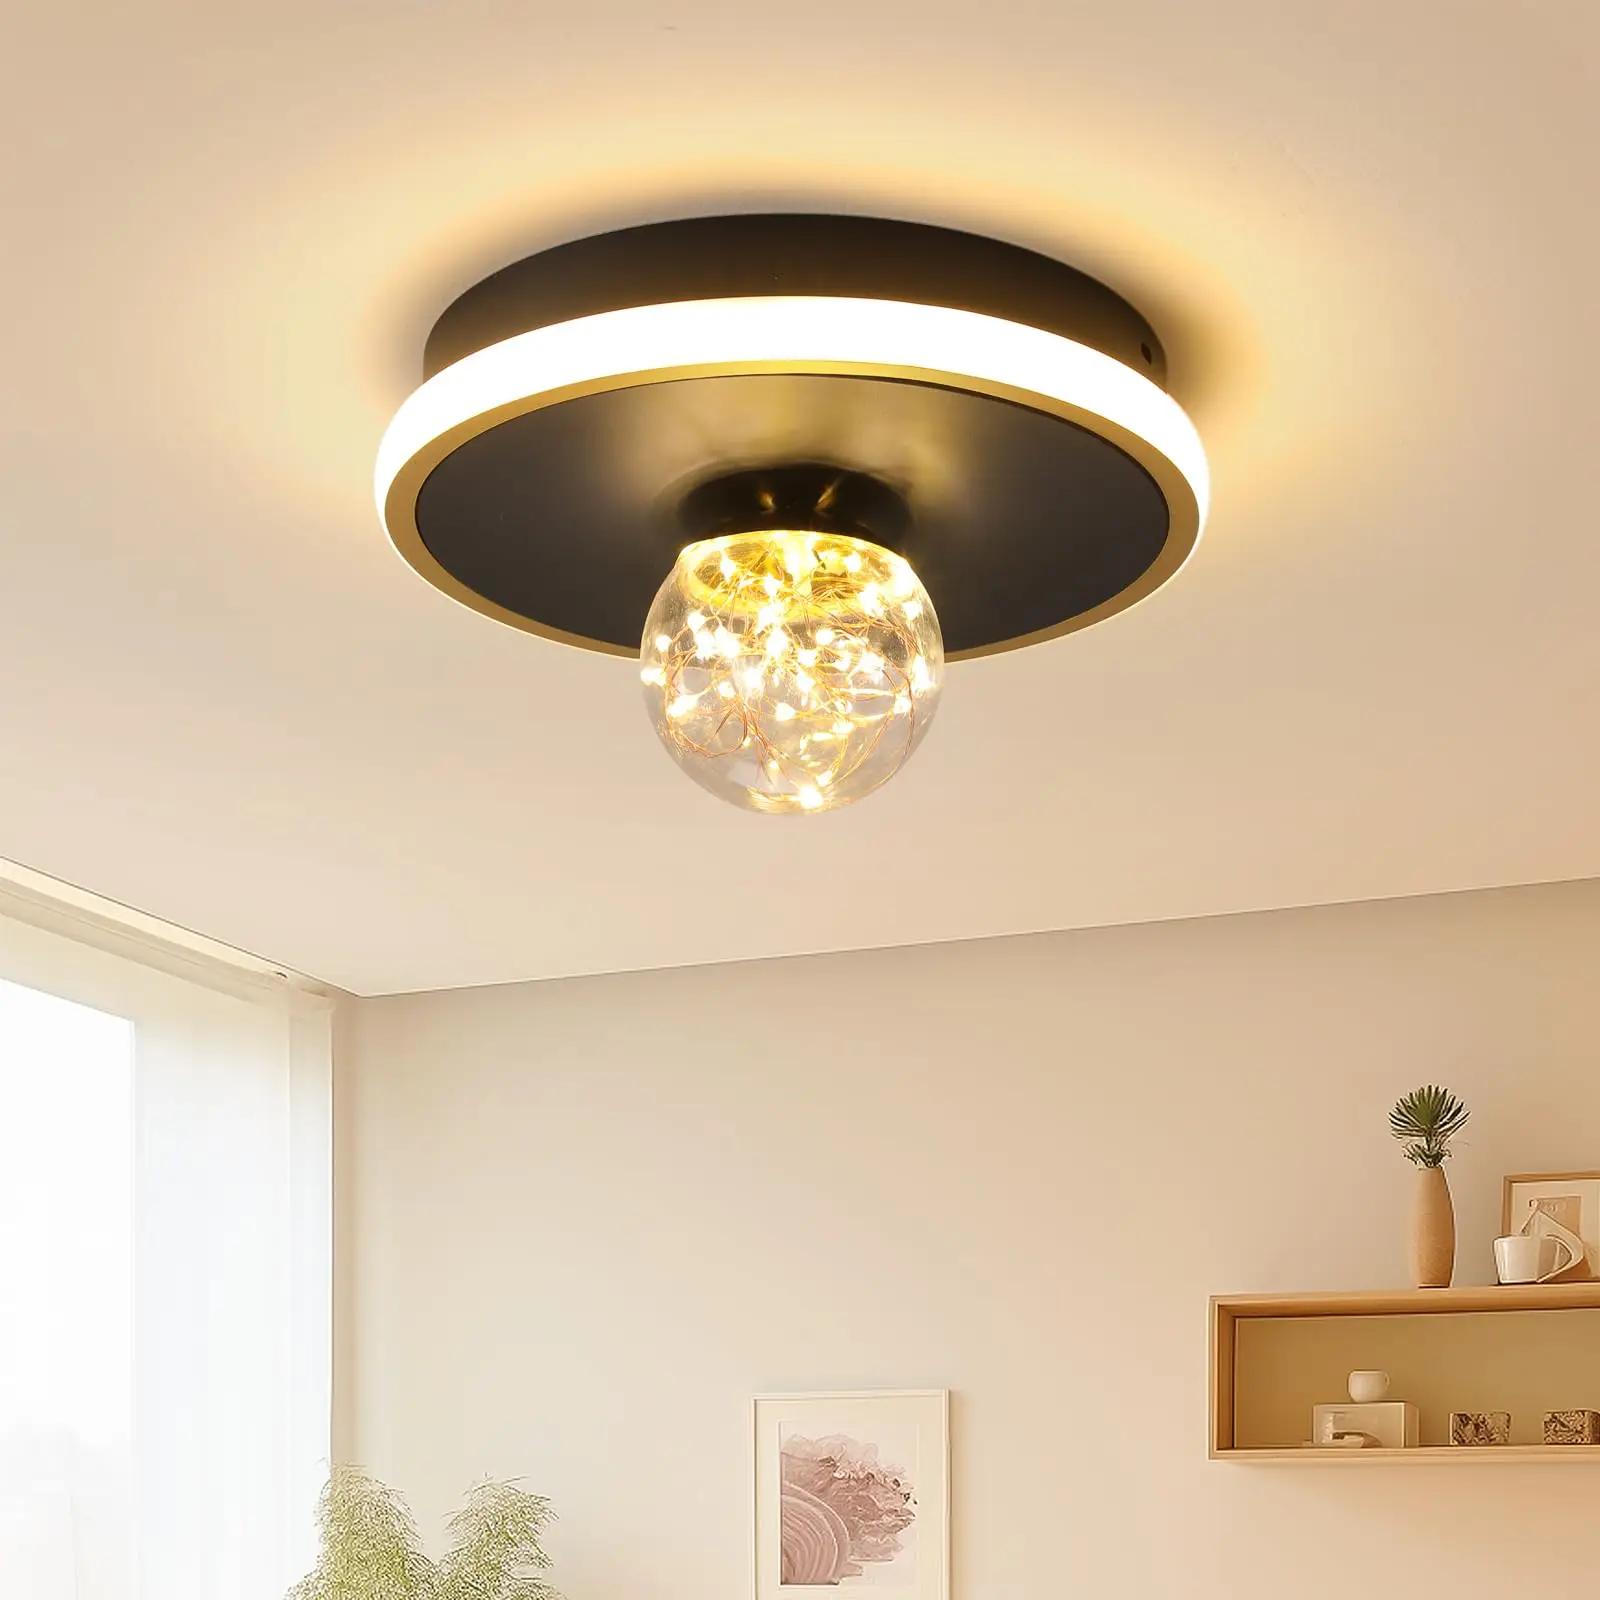 

LED Ceiling Light,24W Black Lamp,Close to Ceiling Lighting,Modern Round Semi Flush Mount lamp for Aisle Porch Stairway Hallway